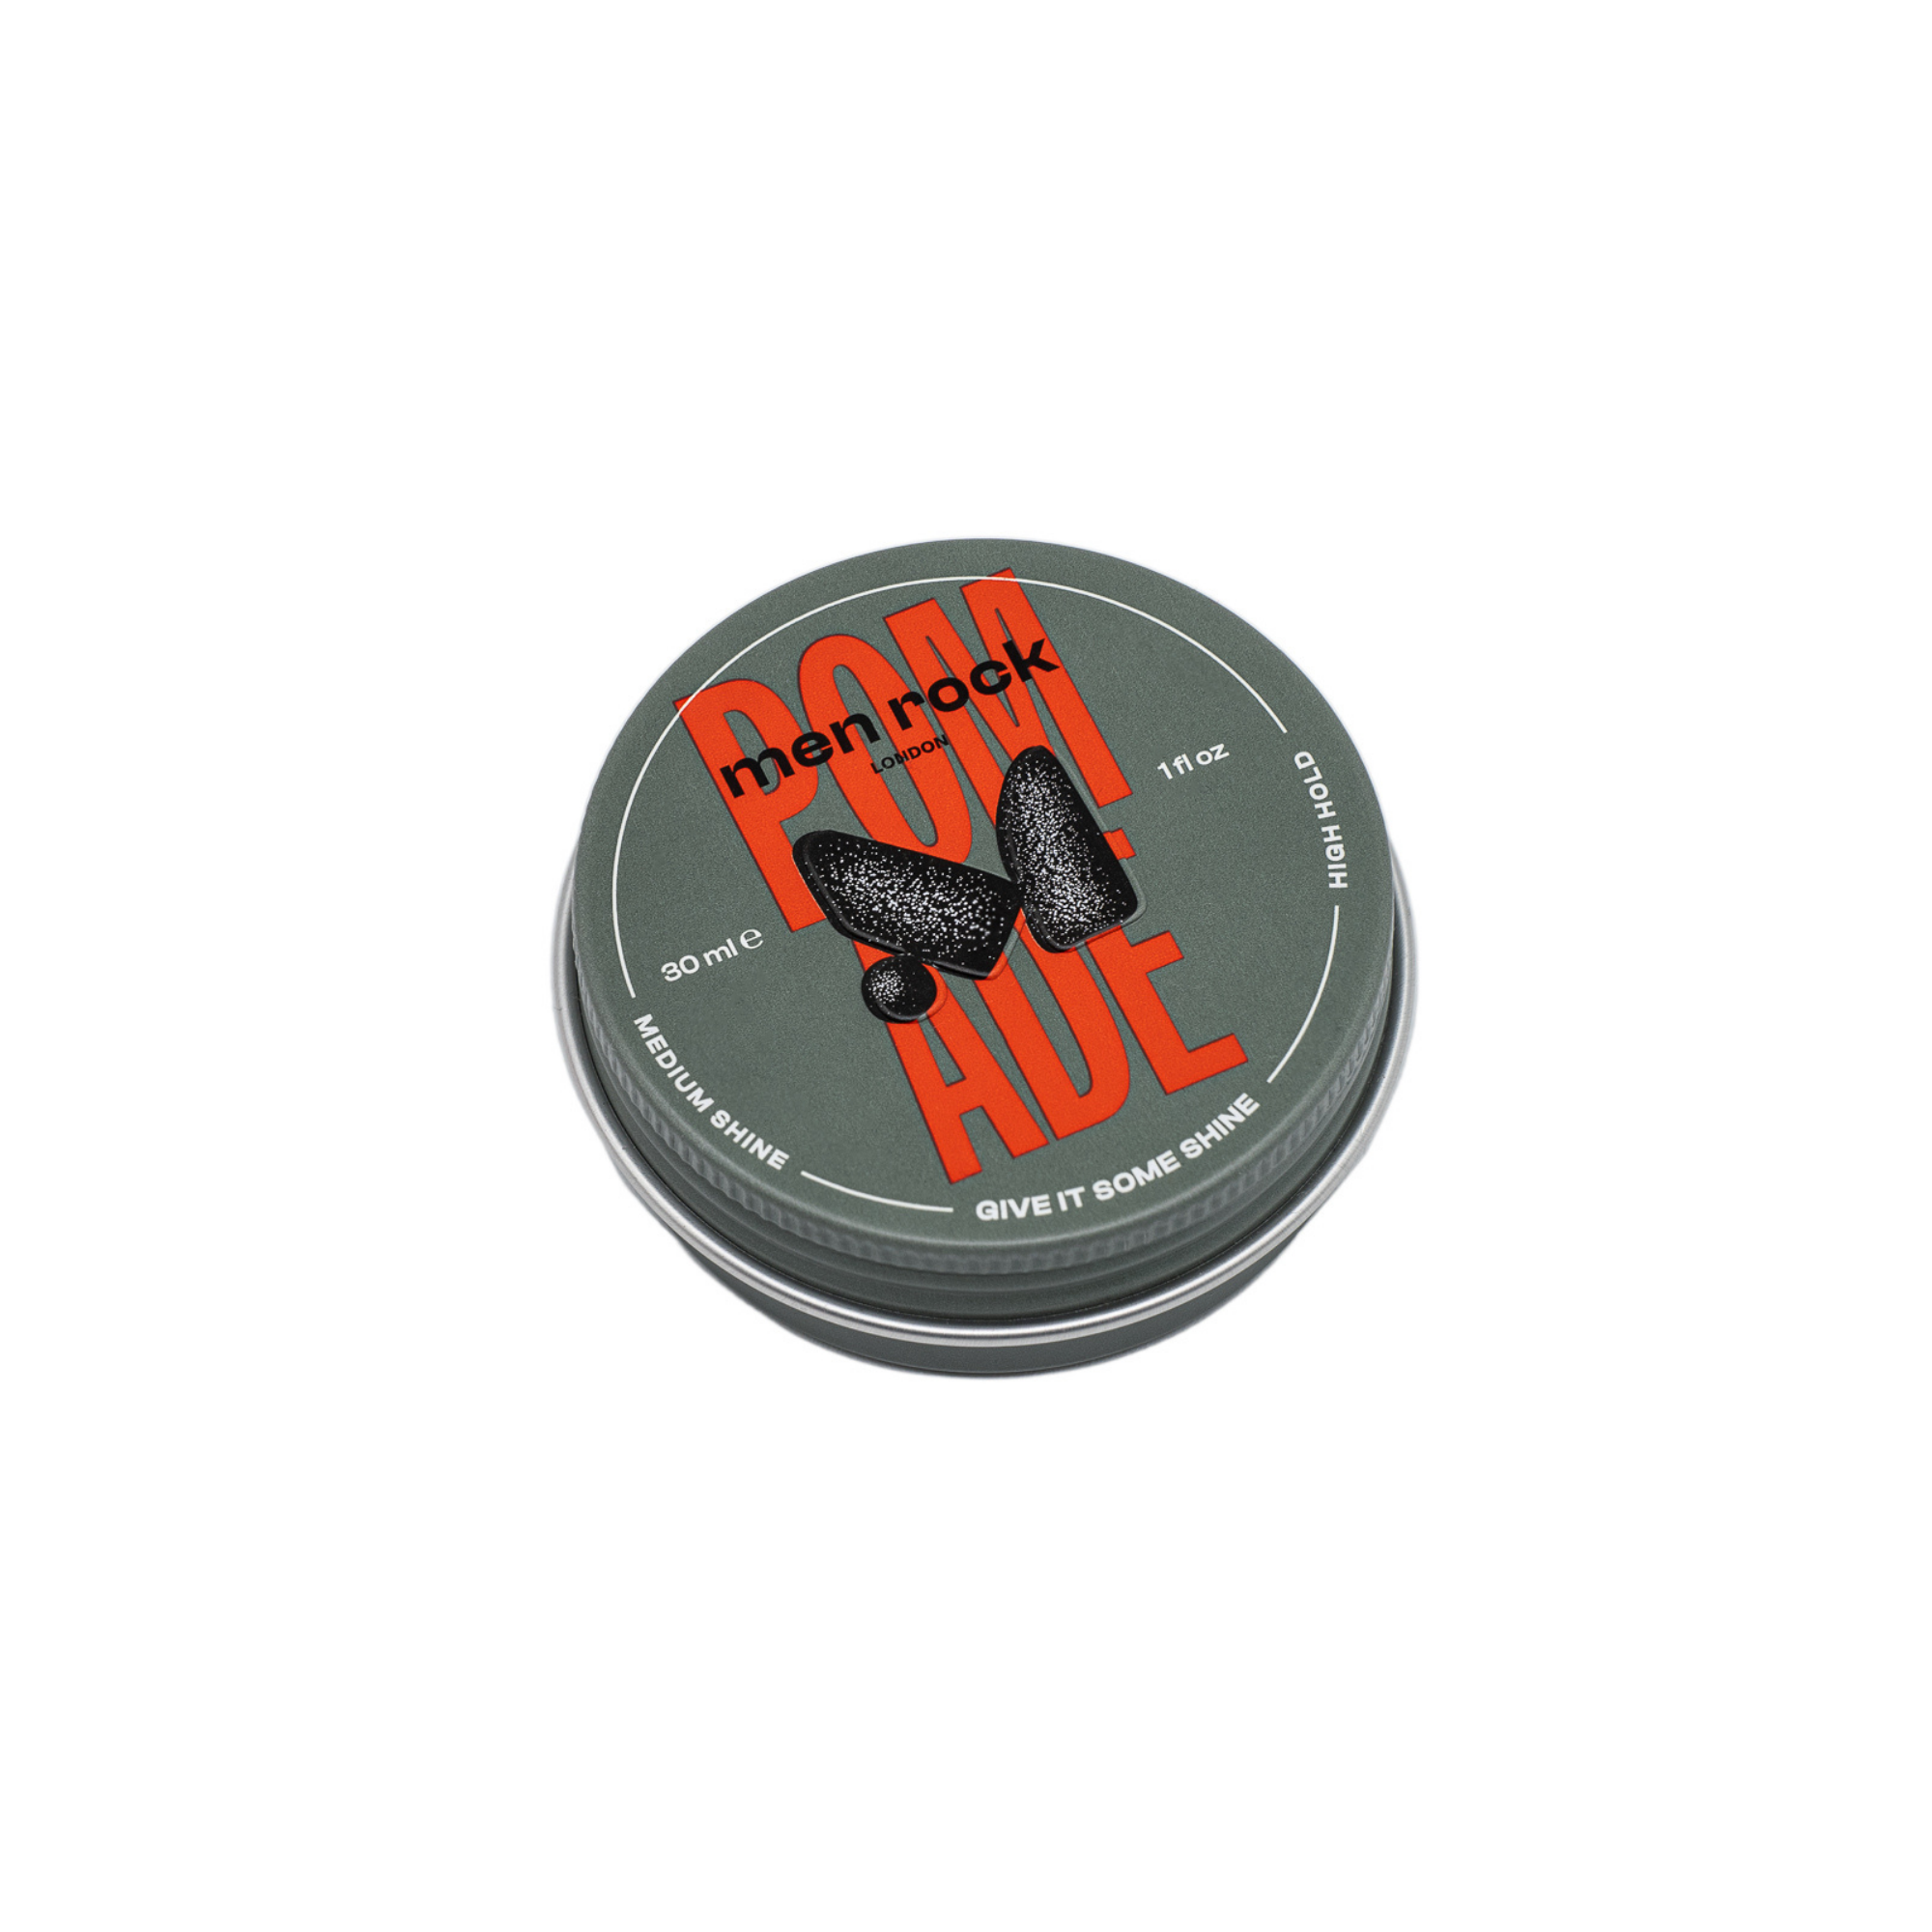 Give it some shine with high hold  pomade from men rock